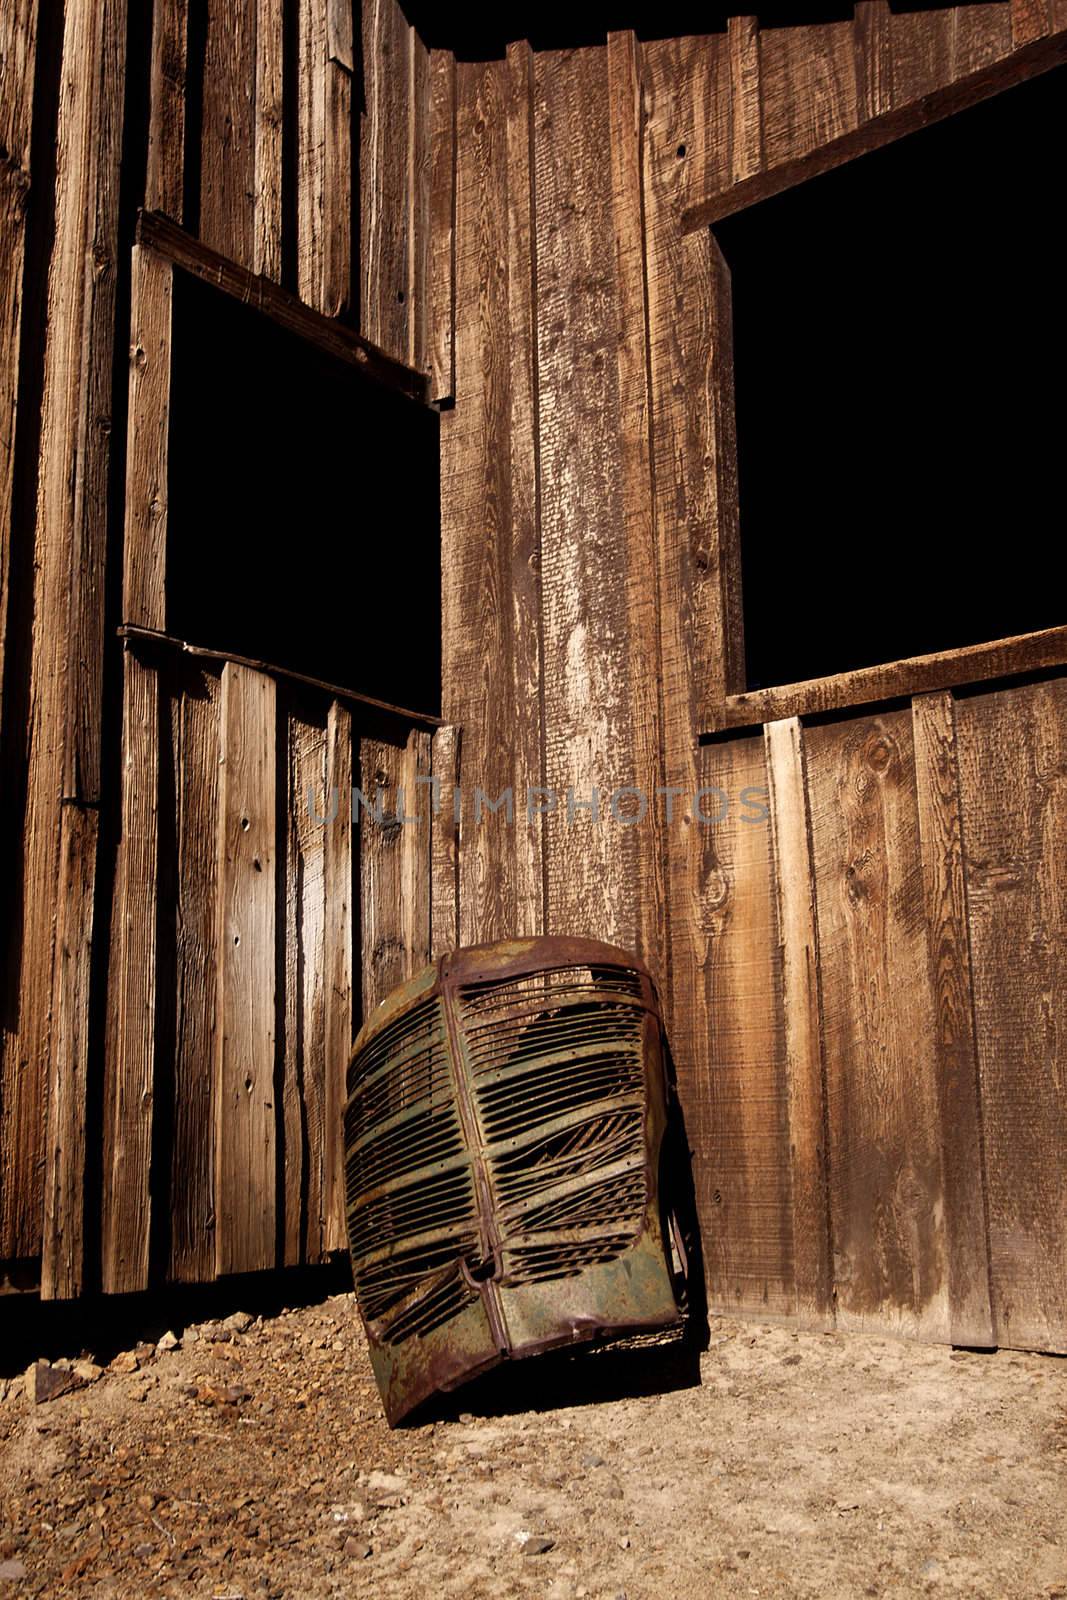 A rusty old truck grill against a barn. by jeremywhat